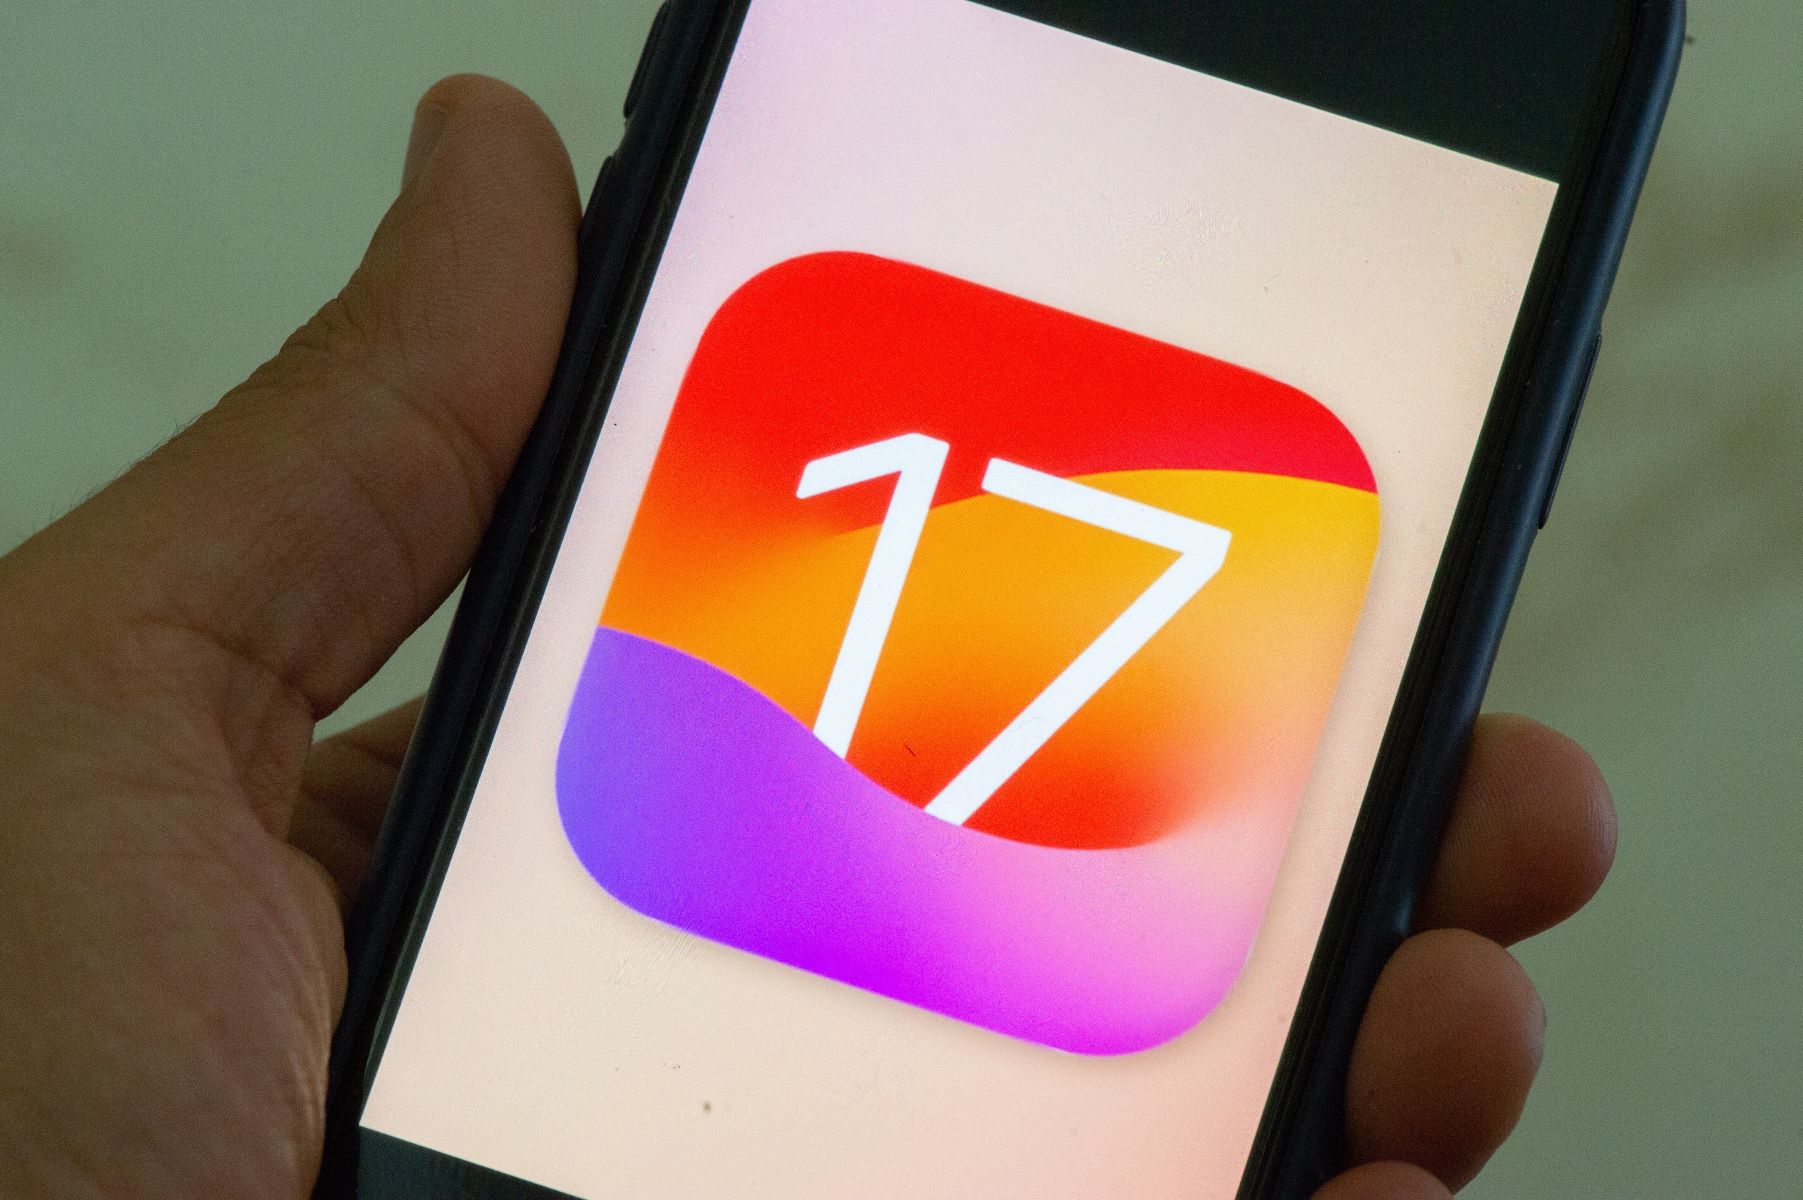 IOS 17: The Latest Security And Privacy Features For IPhone Owners